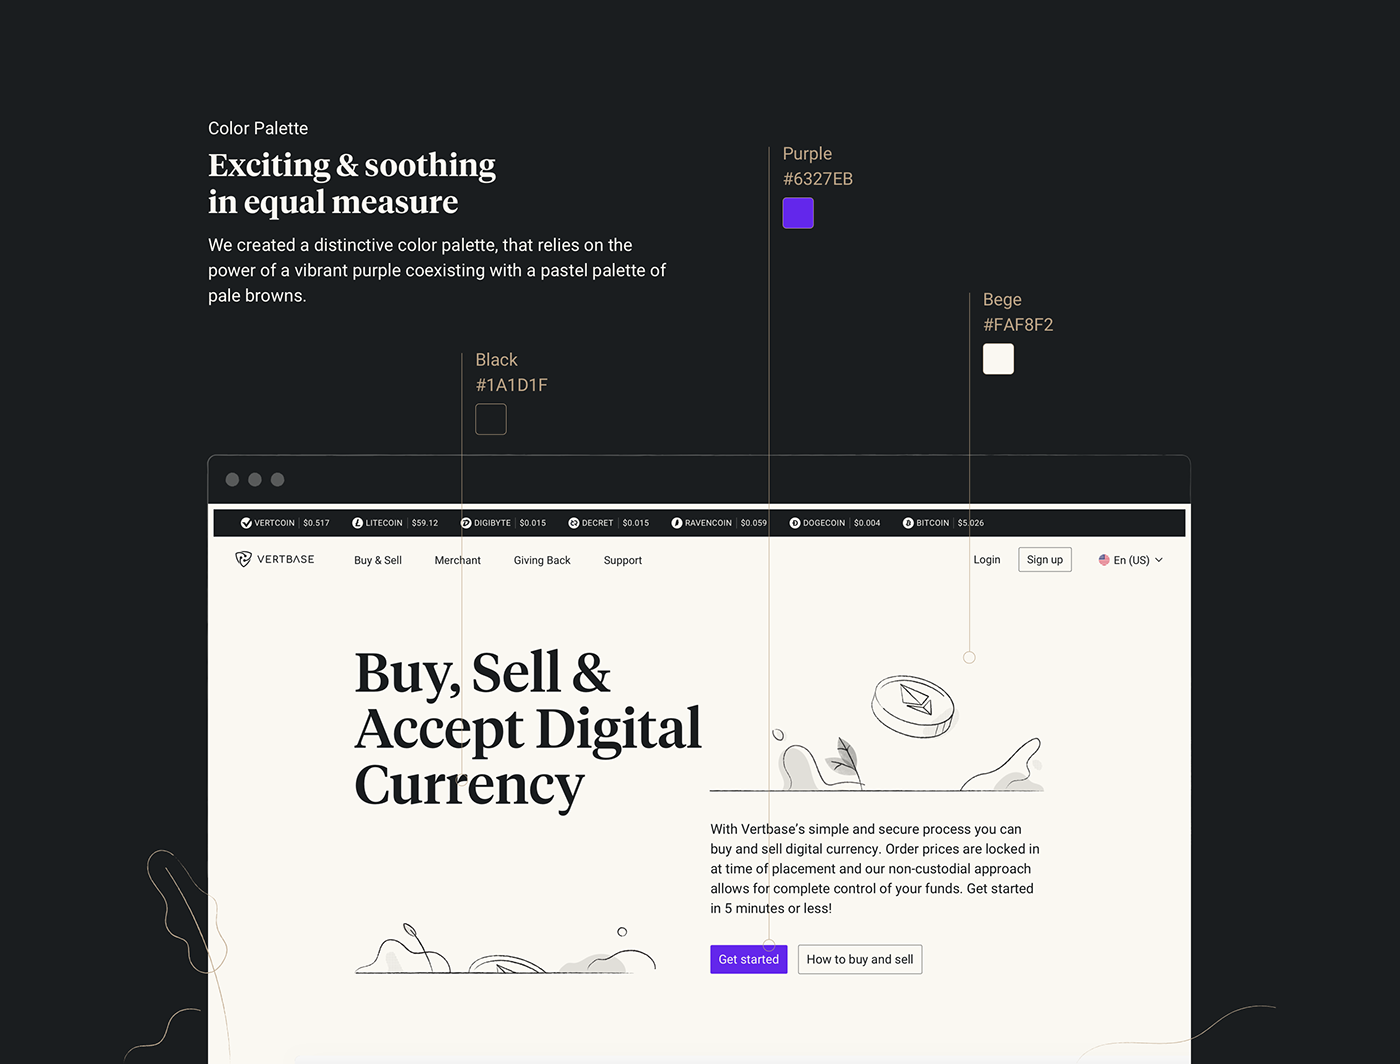 Website landing page ILLUSTRATION  tiempos Interface Significa hands pastel crypo currency